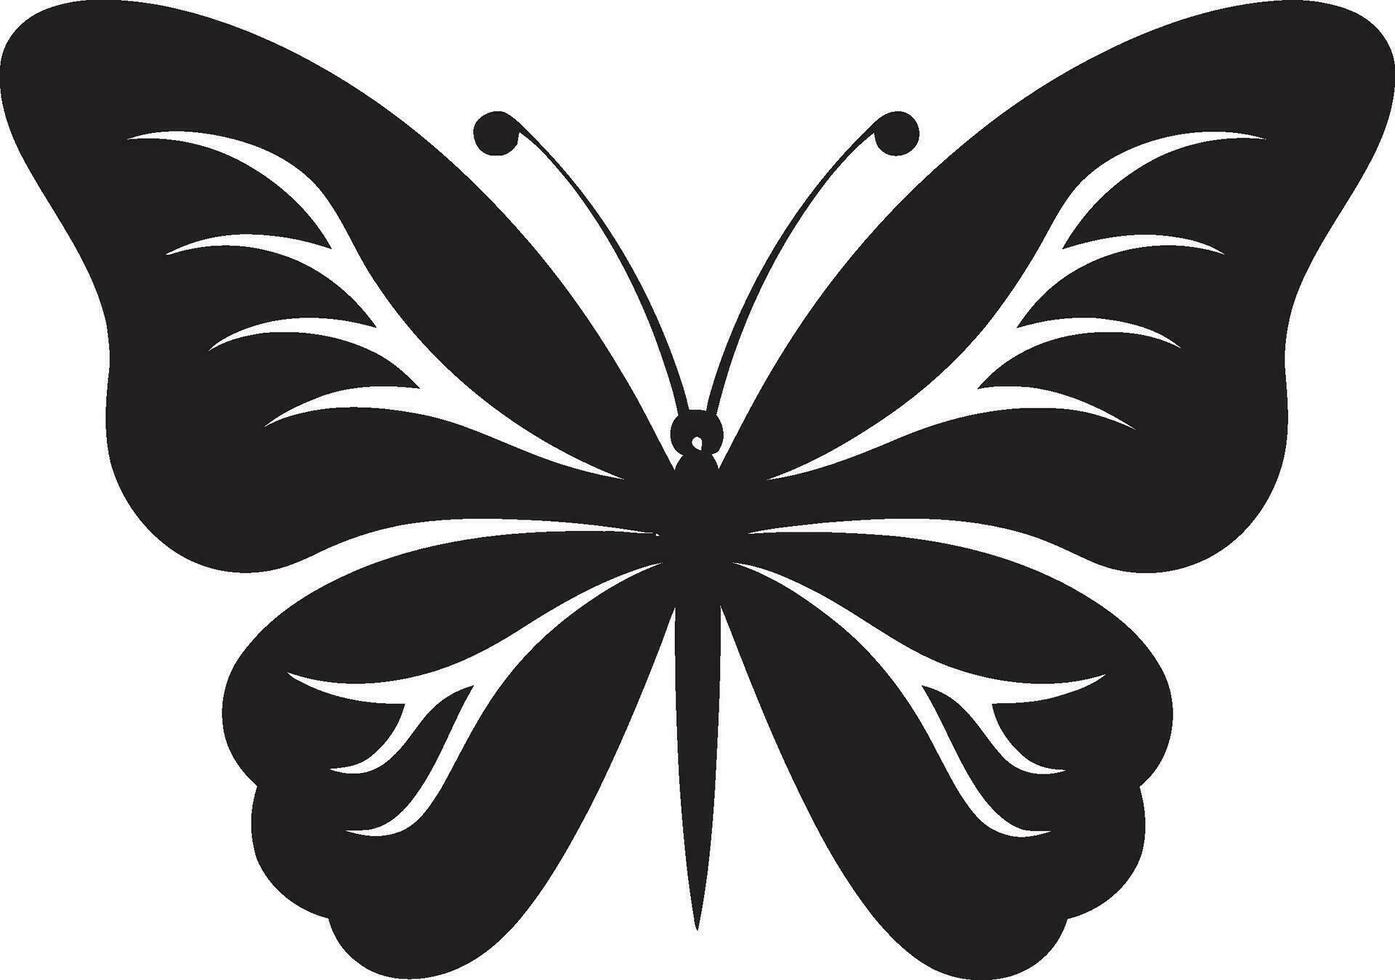 Butterfly Silhouette A Modern Classic in Black Elegance in Shadows Butterfly Symbol vector